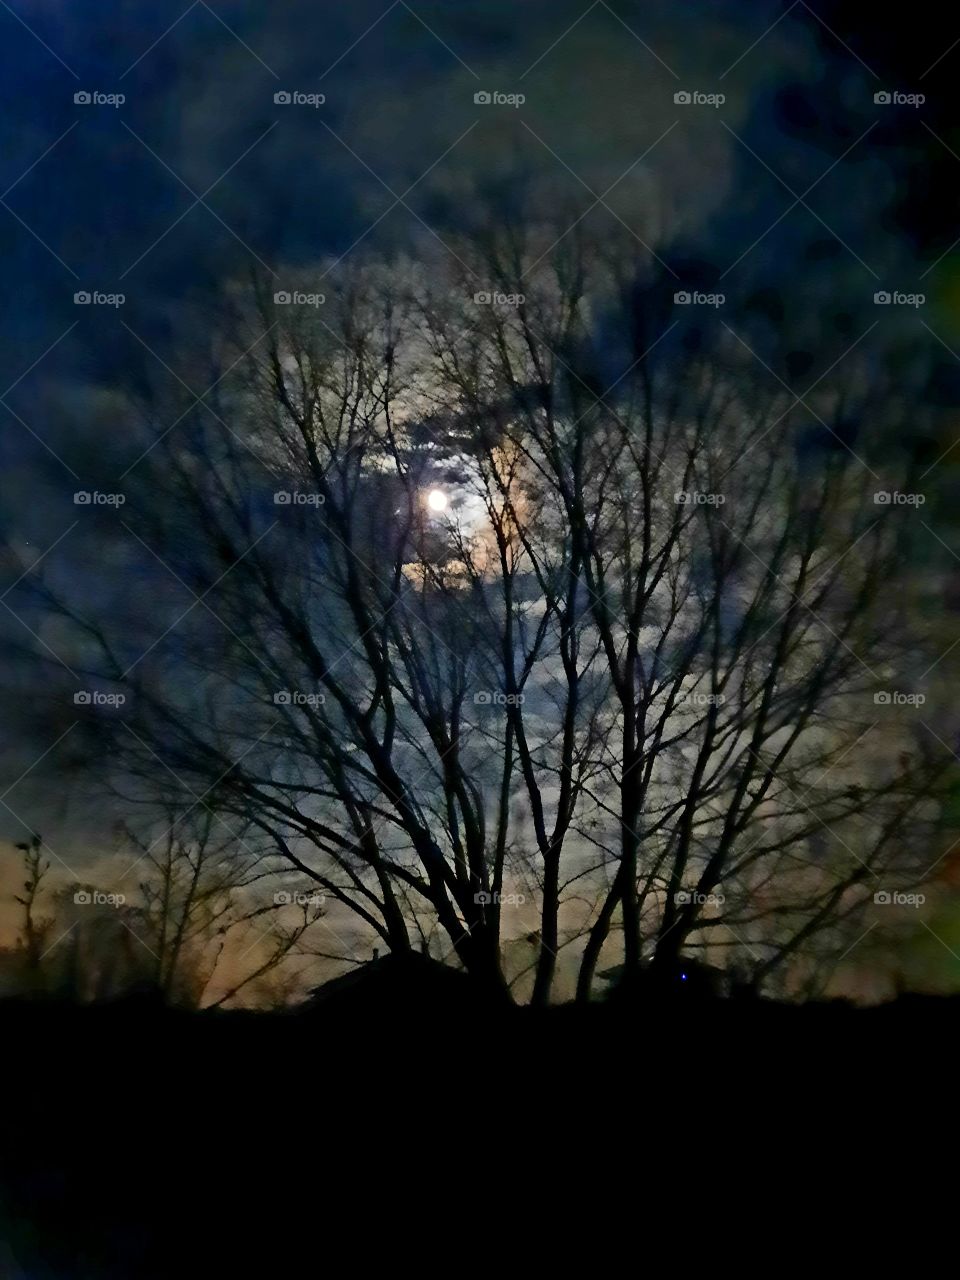 trees around us - black silhouettes against night sky with clouds and moon